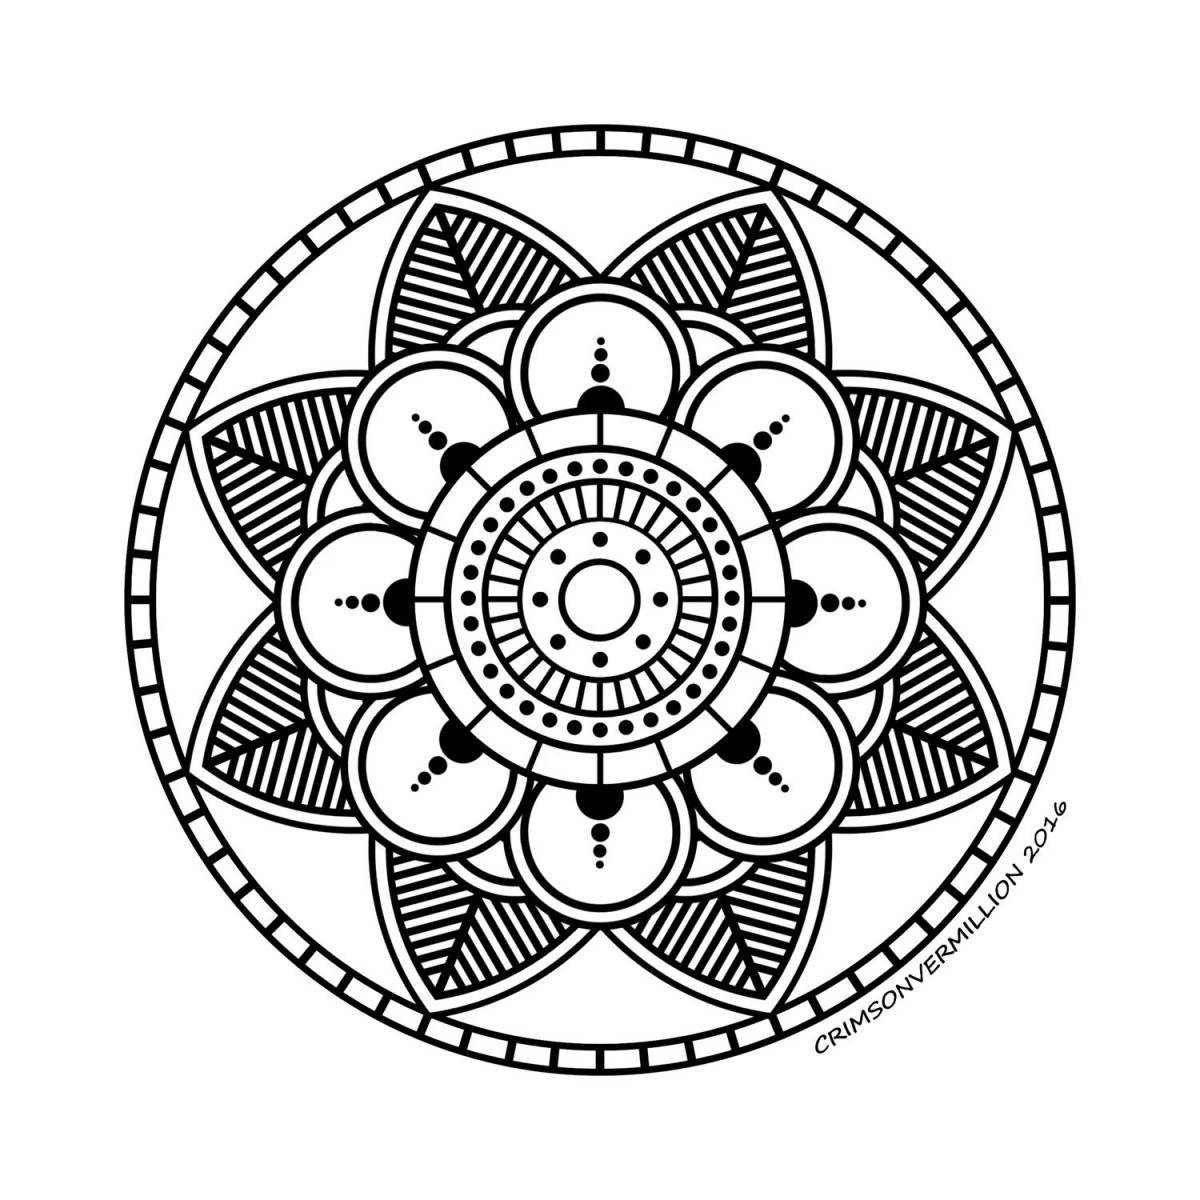 Charming mandala coloring book for 10 year olds